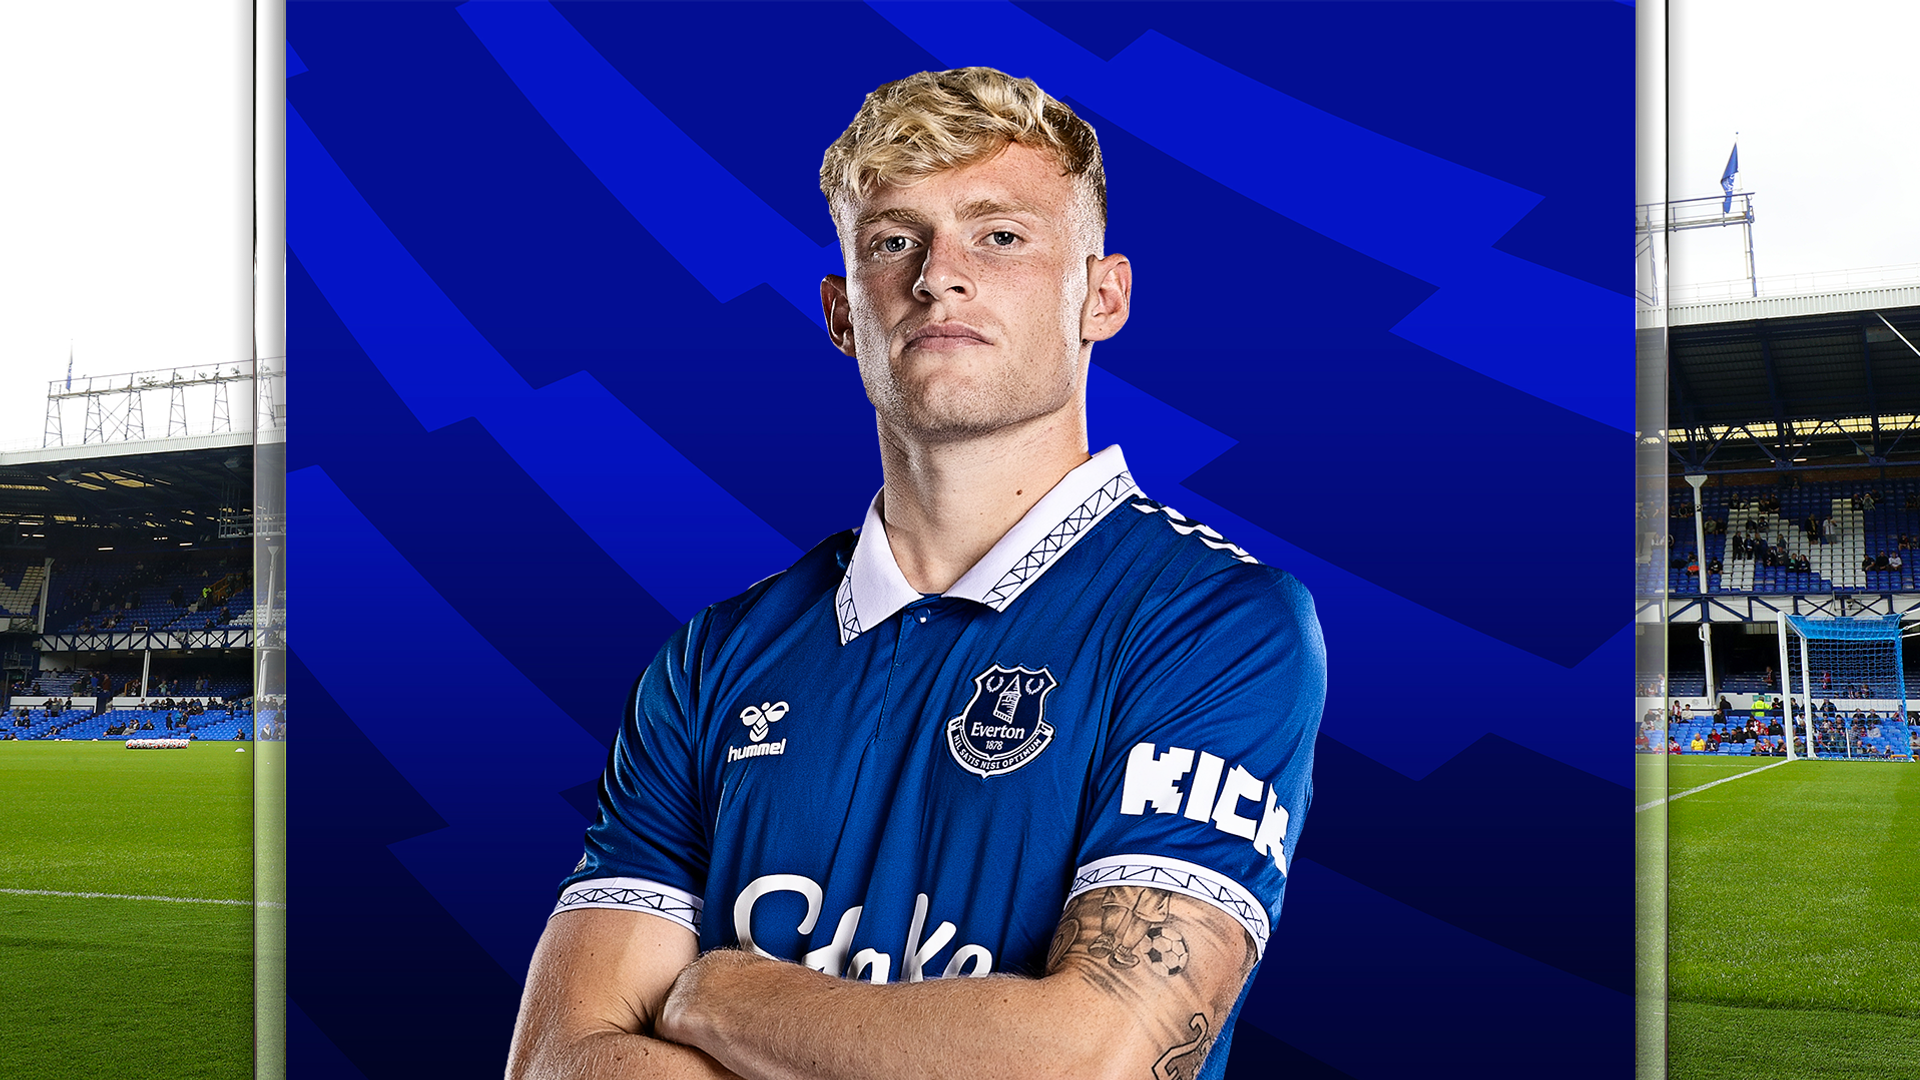 Branthwaite’s brilliance making the difference for Everton